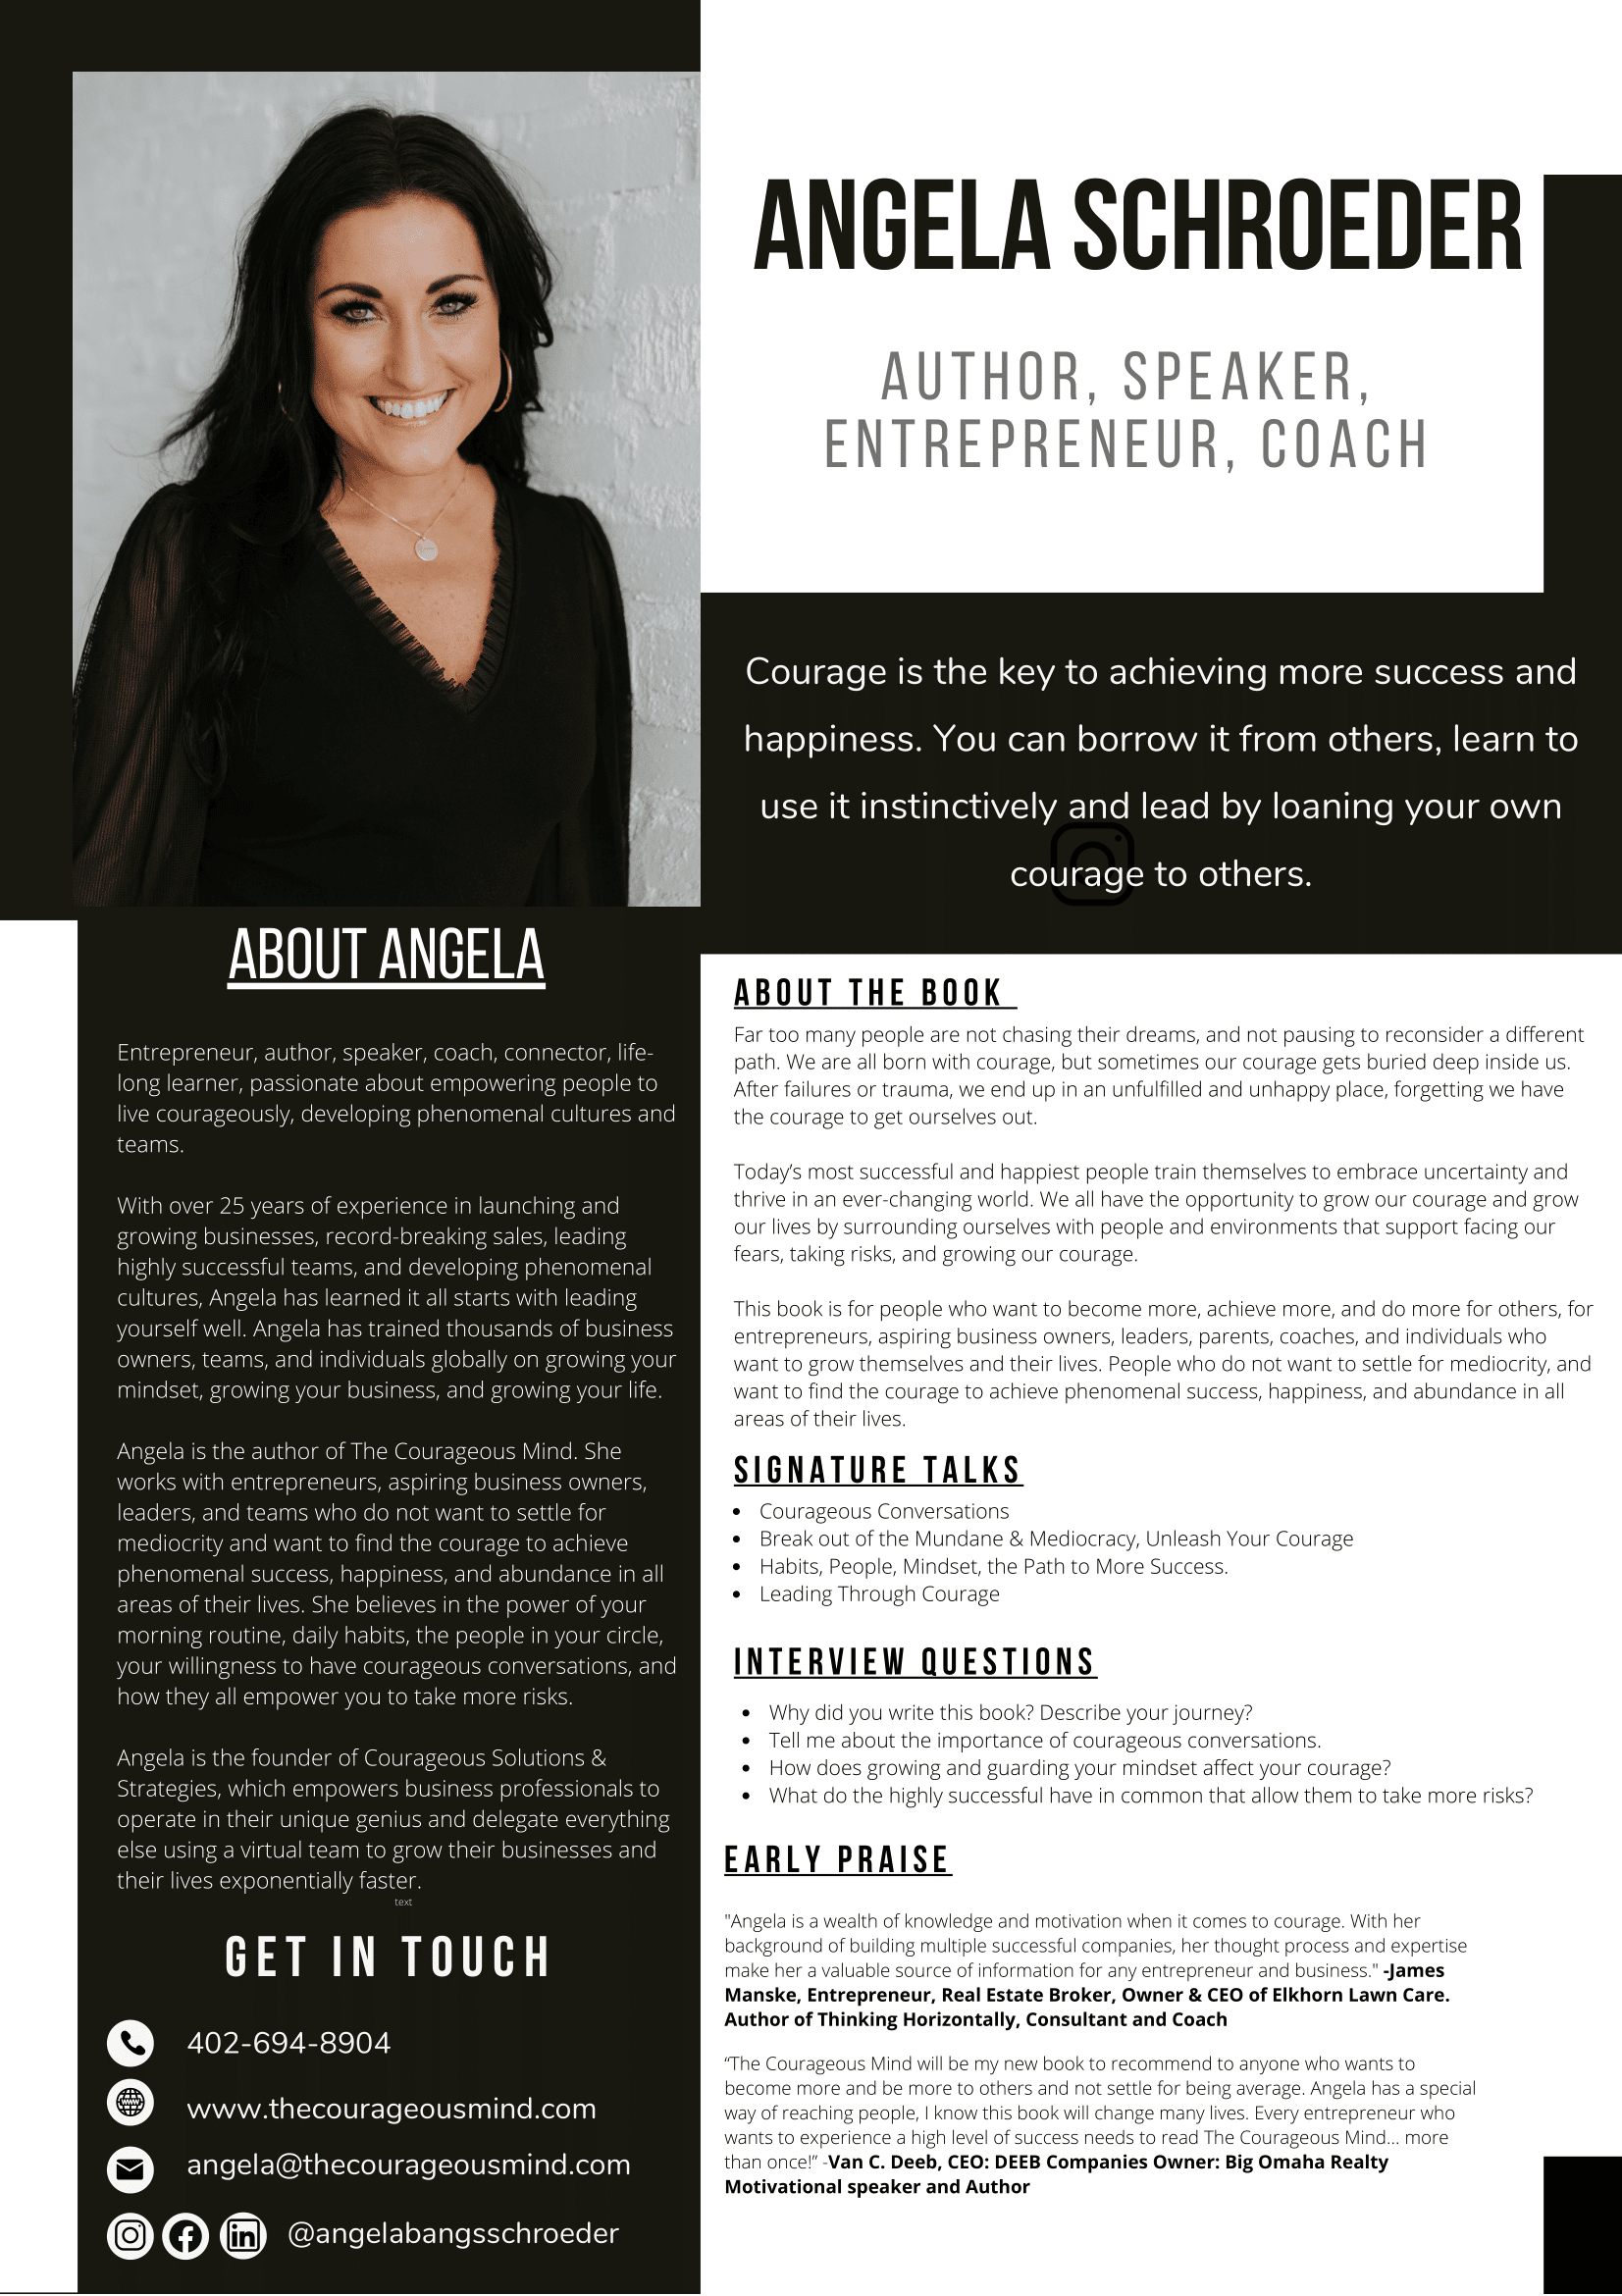 One Pager of Angela Schroeder - The Courageous Mind